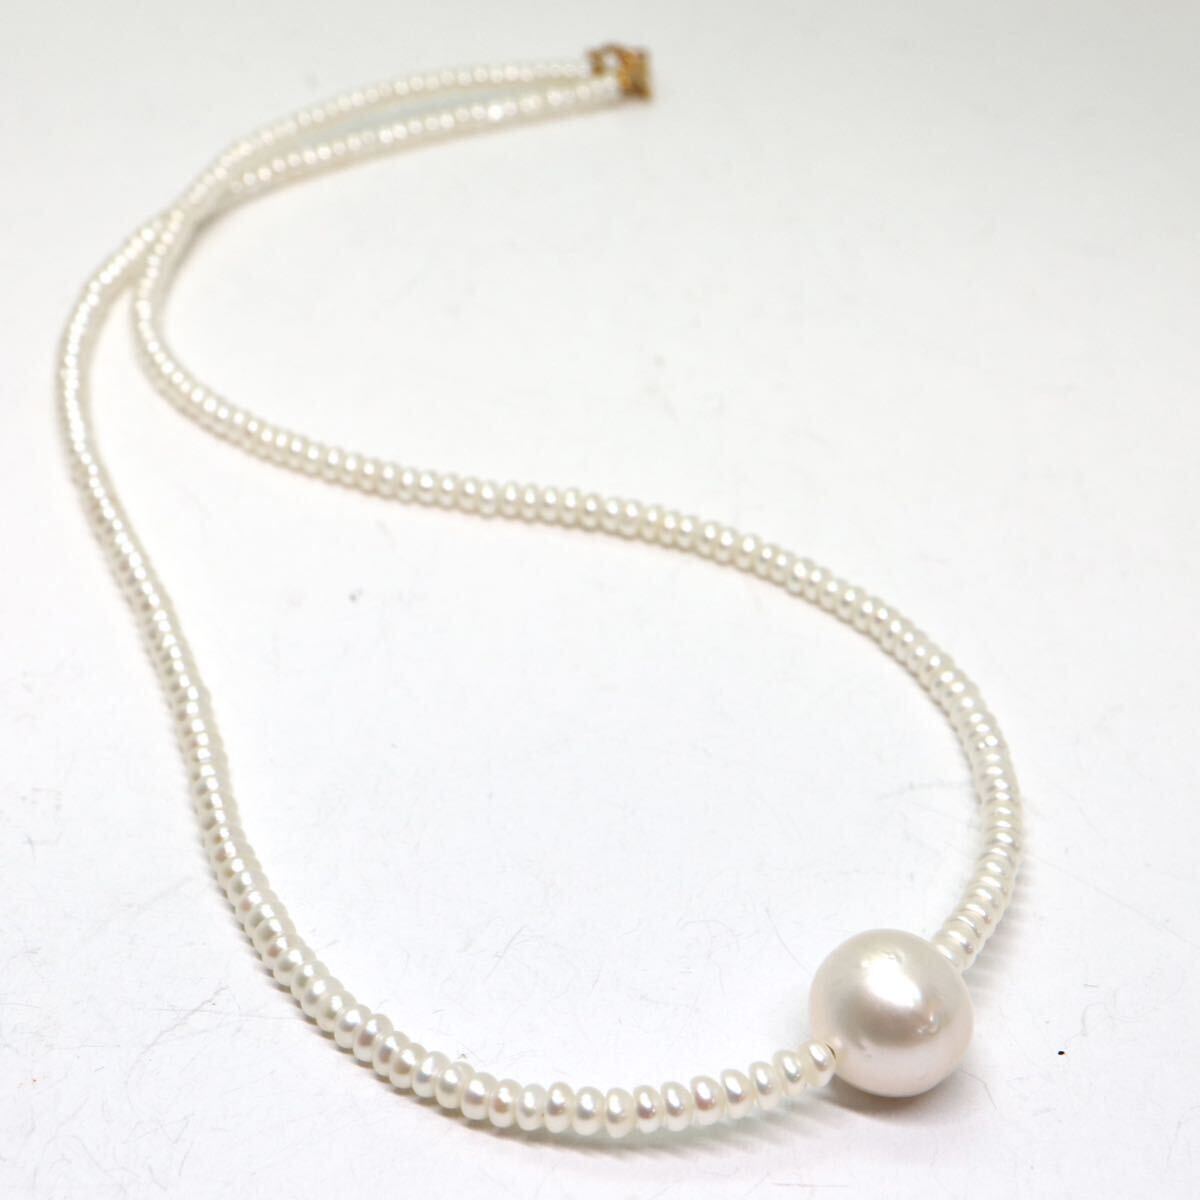 《K18 本真珠ネックレス》M 7.5g 約43cm pearl necklace ジュエリー jewelry DC0/DD0_画像6